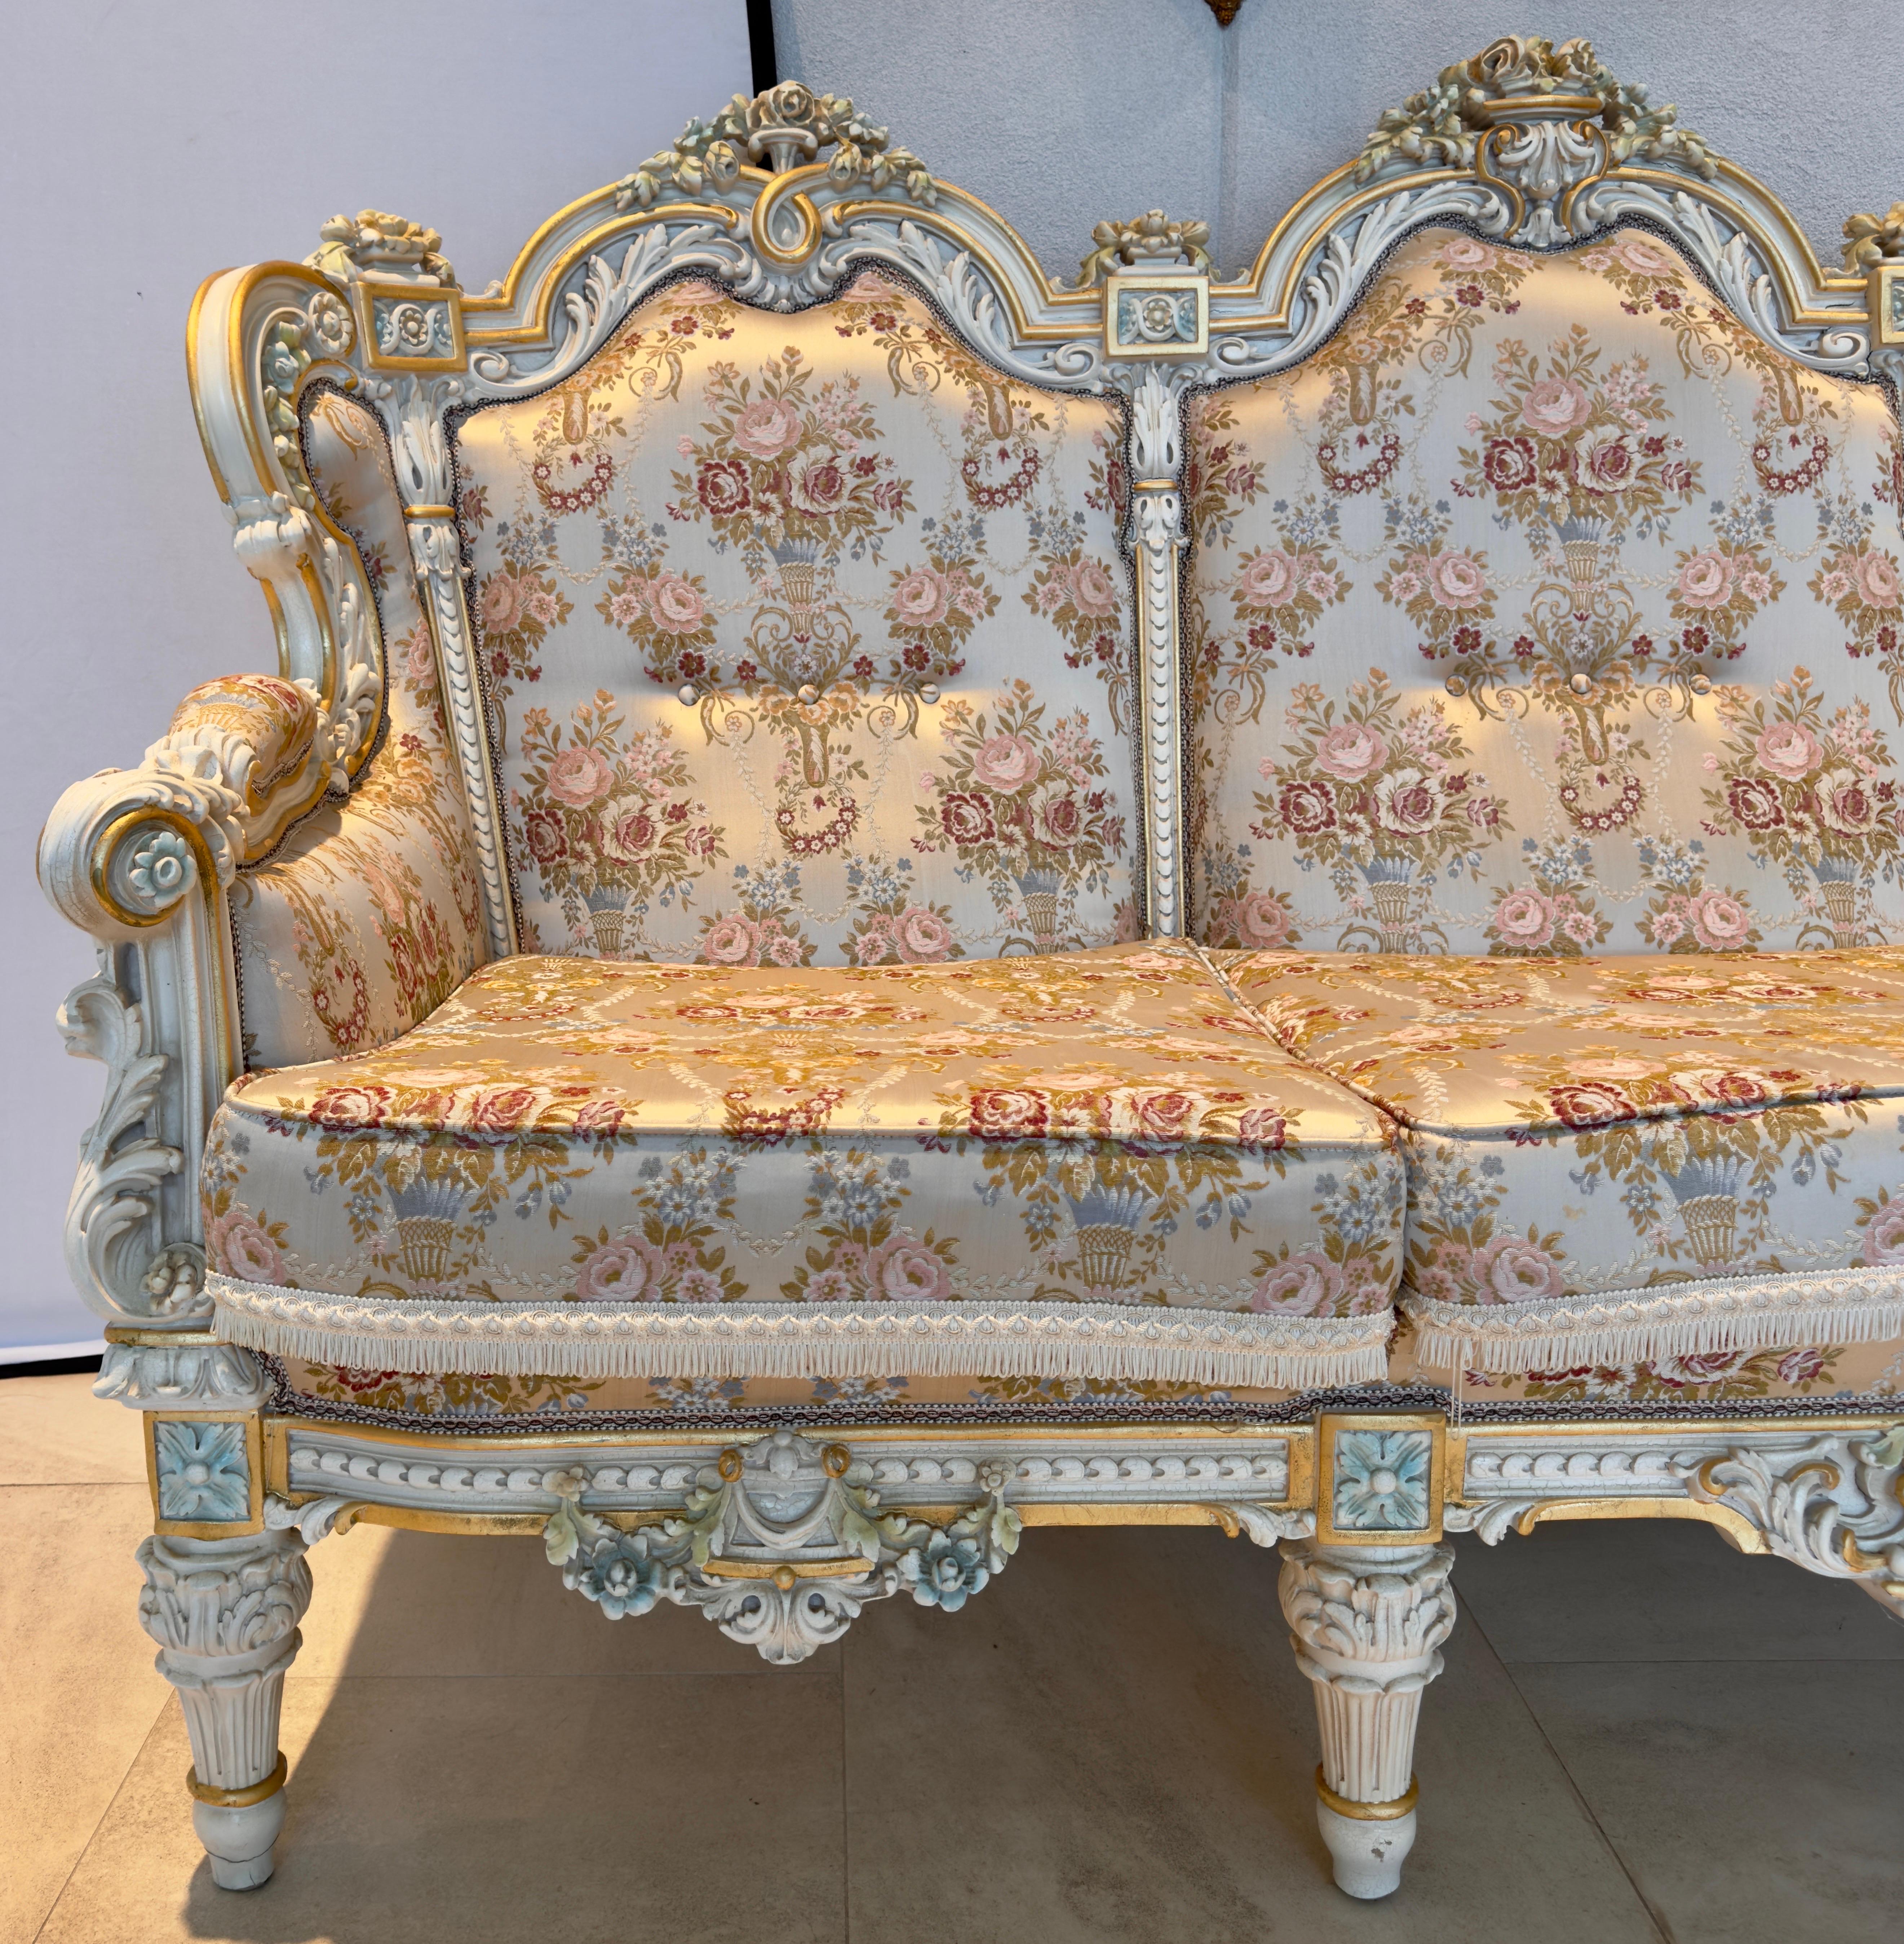 A stunning Italian neoclassical baroque Three-Seater Sofa, a symphony of opulence and comfort designed to adorn your space with unrivaled elegance. 
Carved from the finest materials, the sofa exudes sophistication in its off-white antique finish,